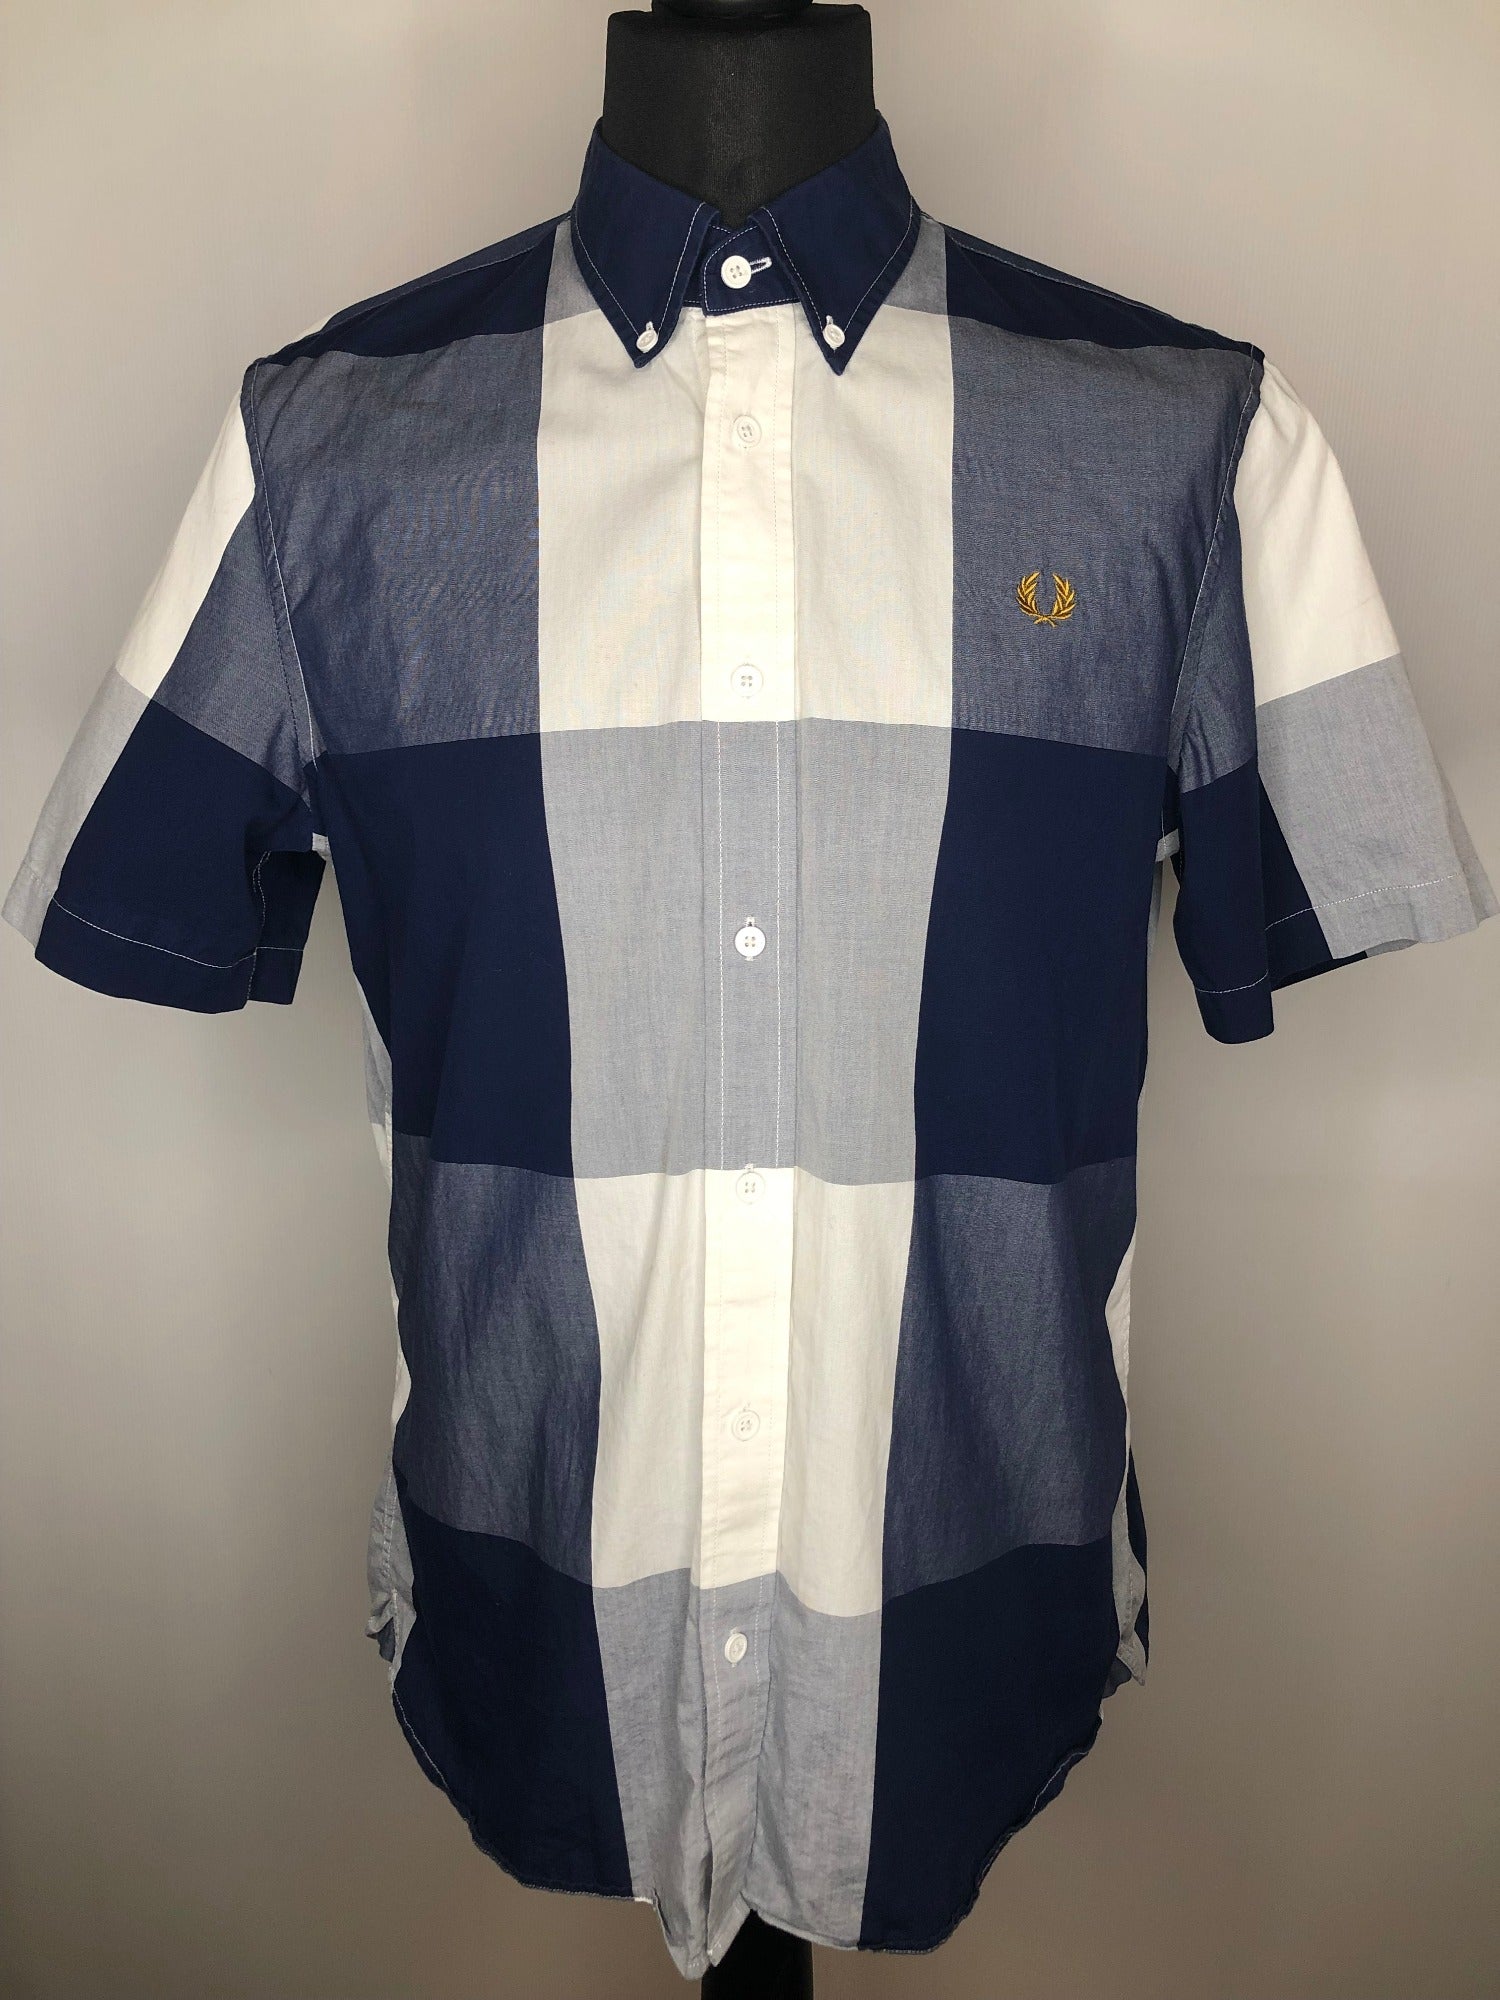 L  white  vintage  top  short sleeved shirt  short sleeved  Shirt  MOD  Mens Shirts  mens  large check  gold logo  Fred Perry  fred  embroidered logo  Embroidered  check shirt  check print  blue